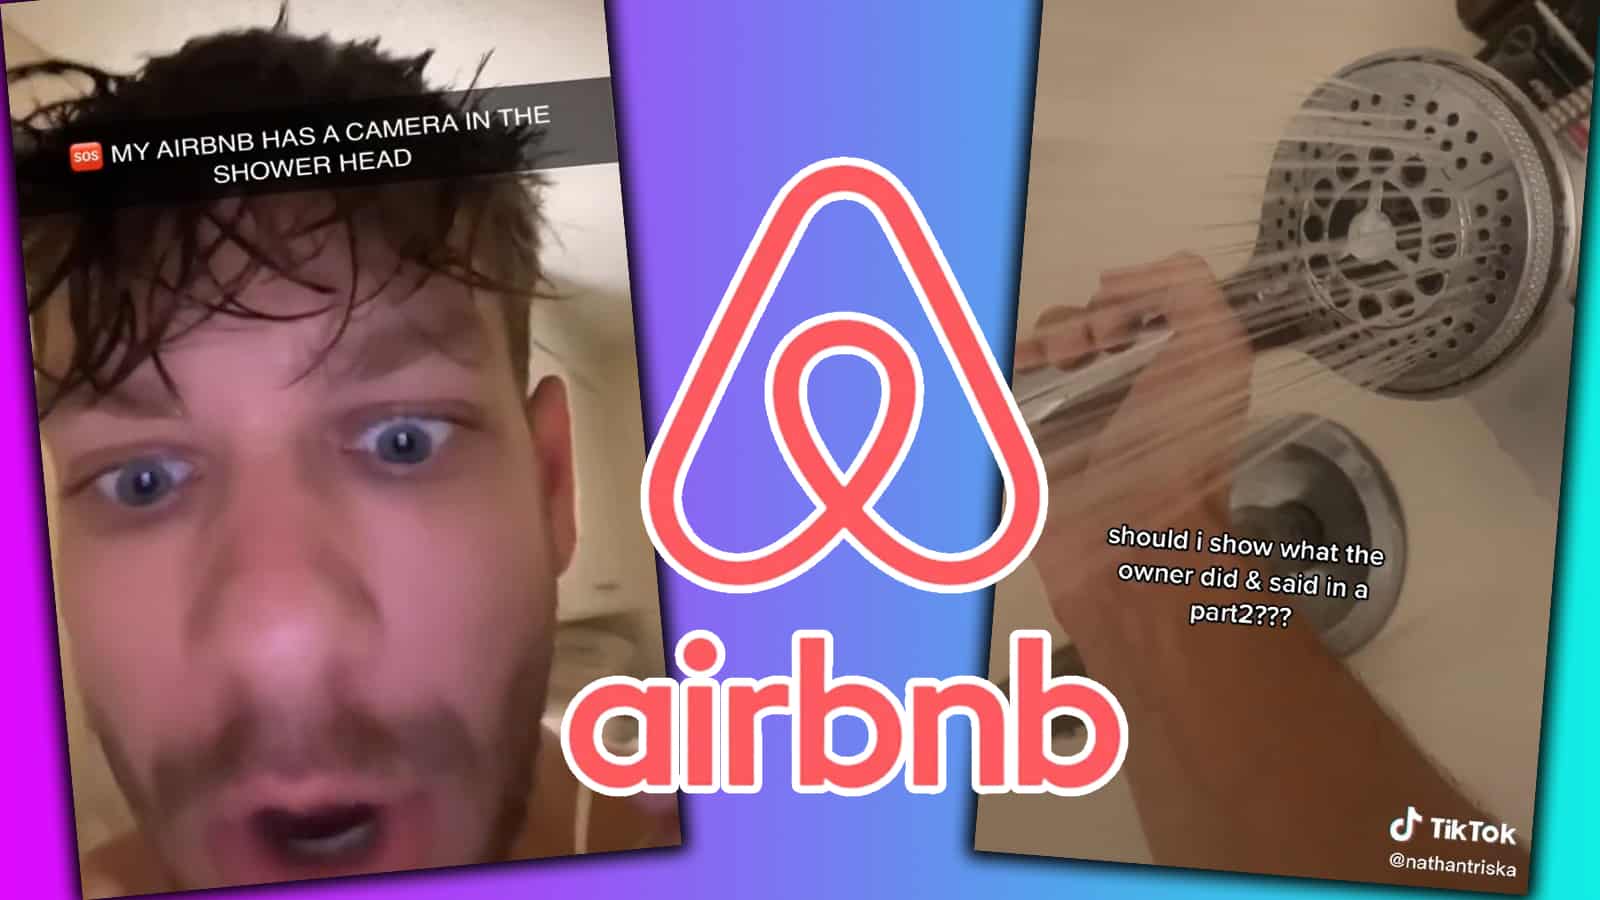 TikTok star Nathan Triska horrified after discovering hidden camera in AirBnB showerhead picture photo